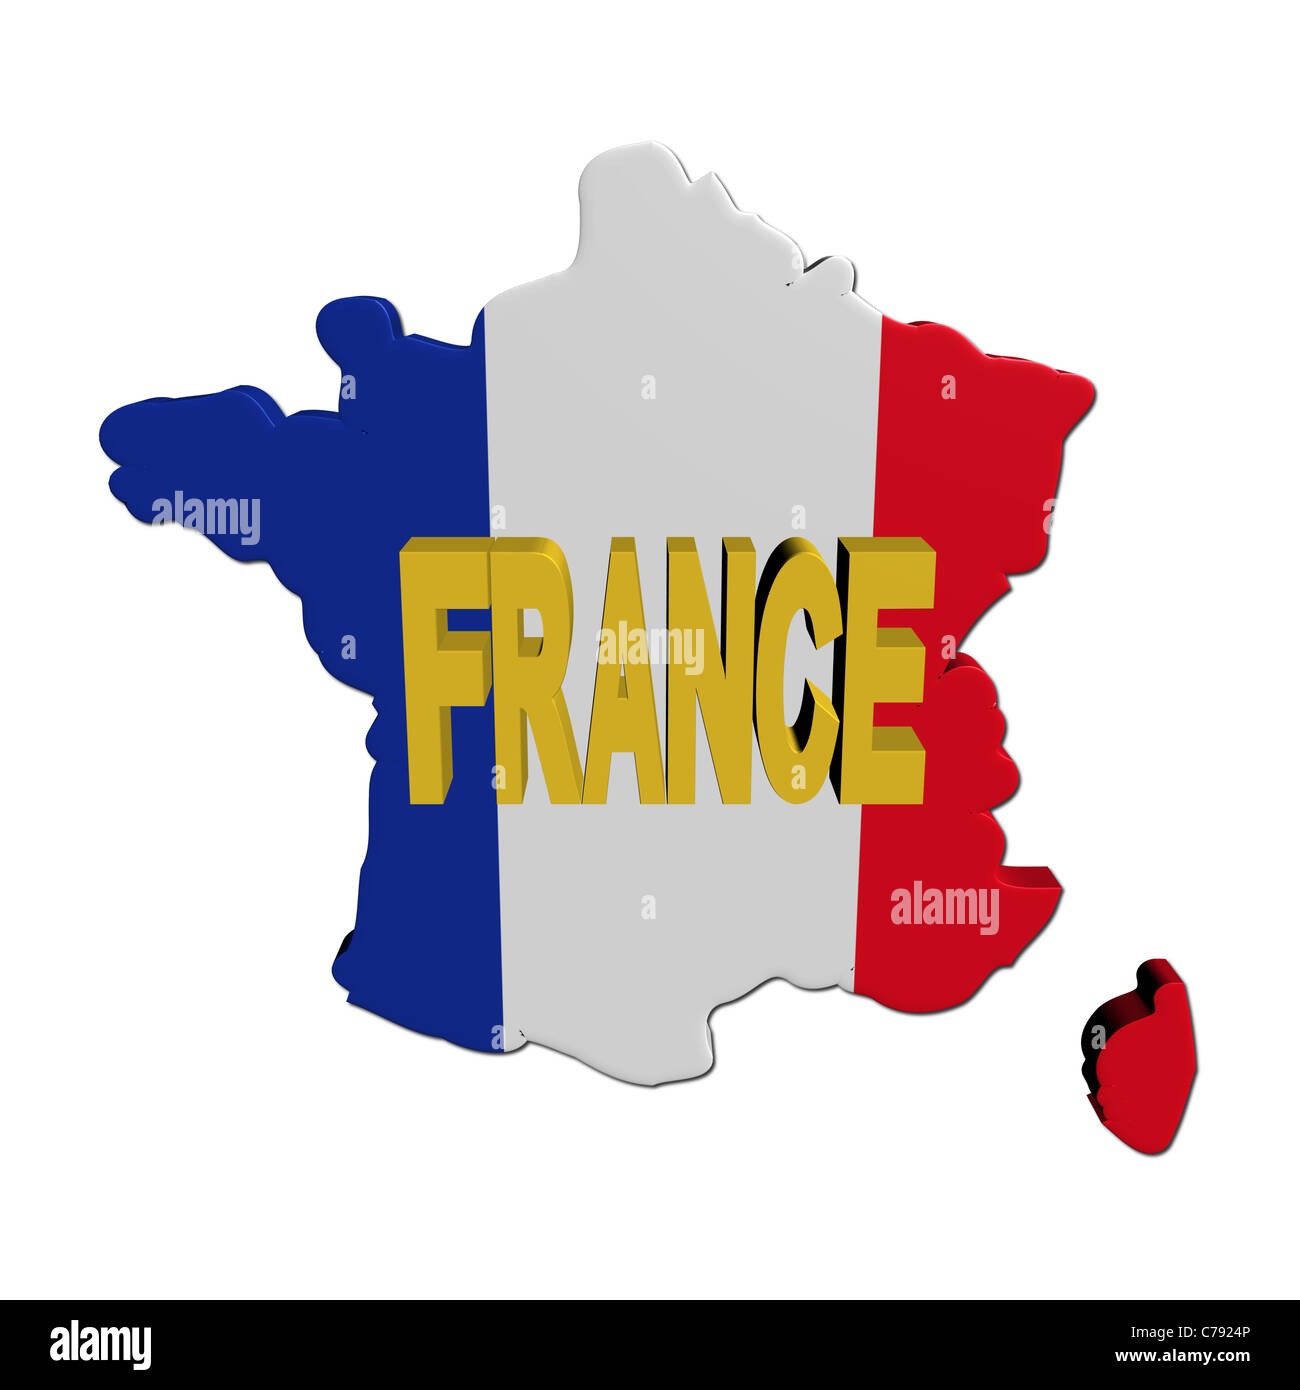 France map flag with text illustration Stock Photo